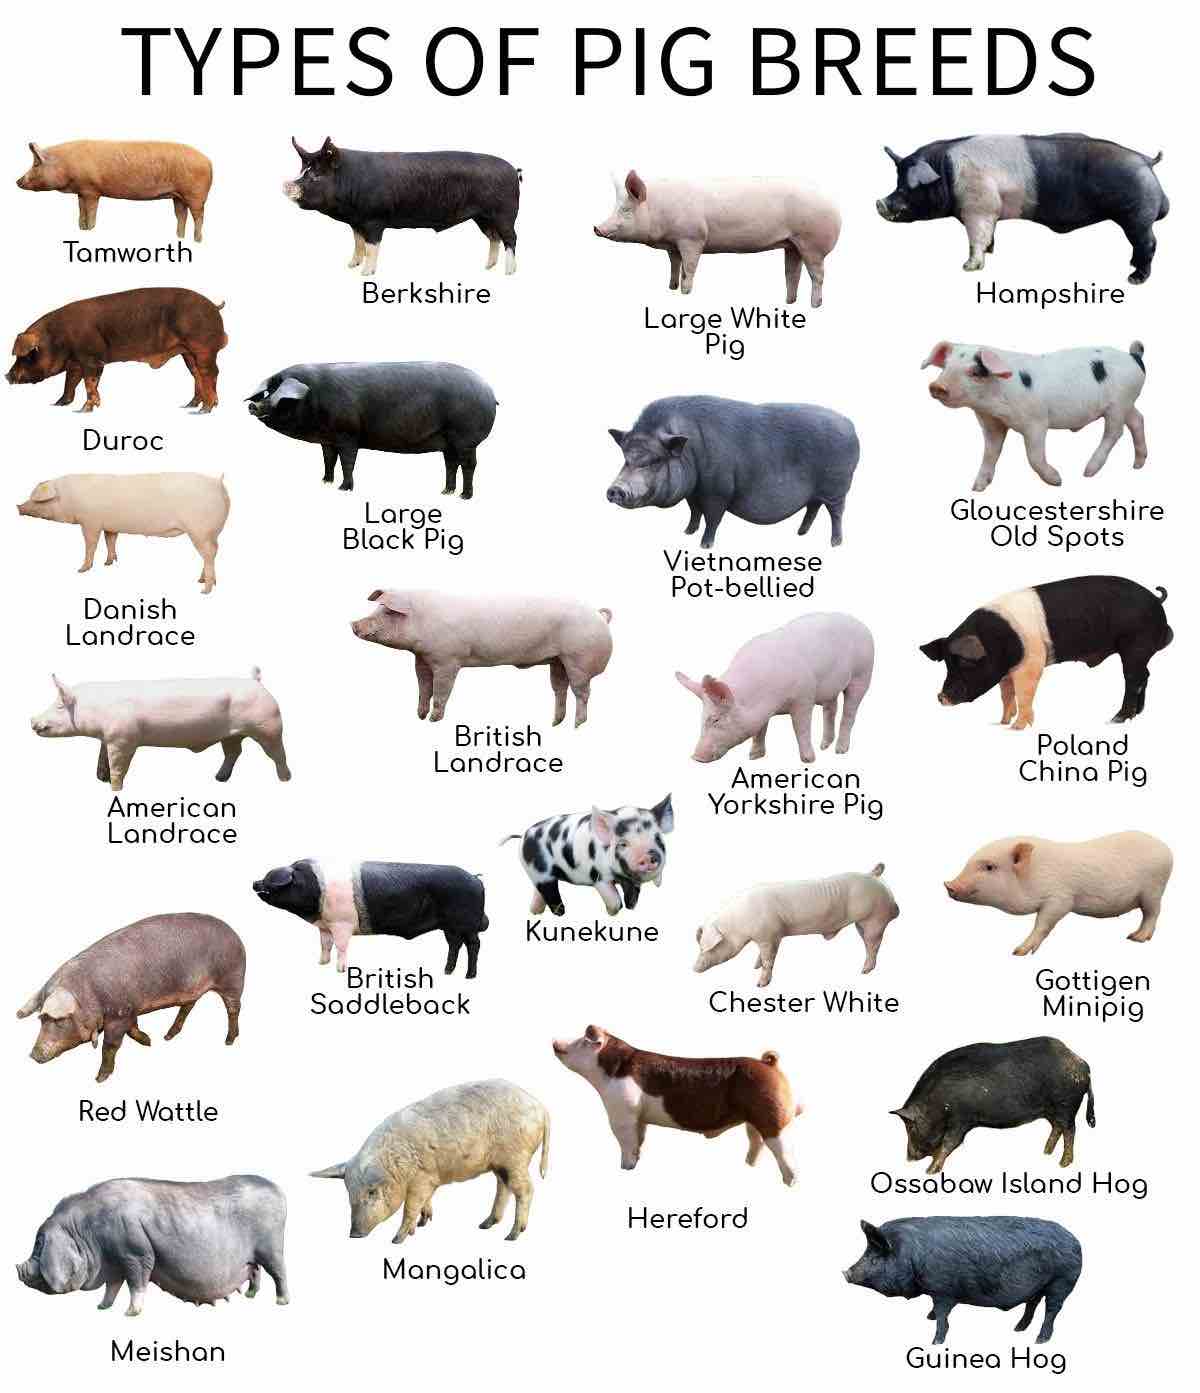 An Overview of the Different Types of Pig Breeds. Image source: Breedslist.